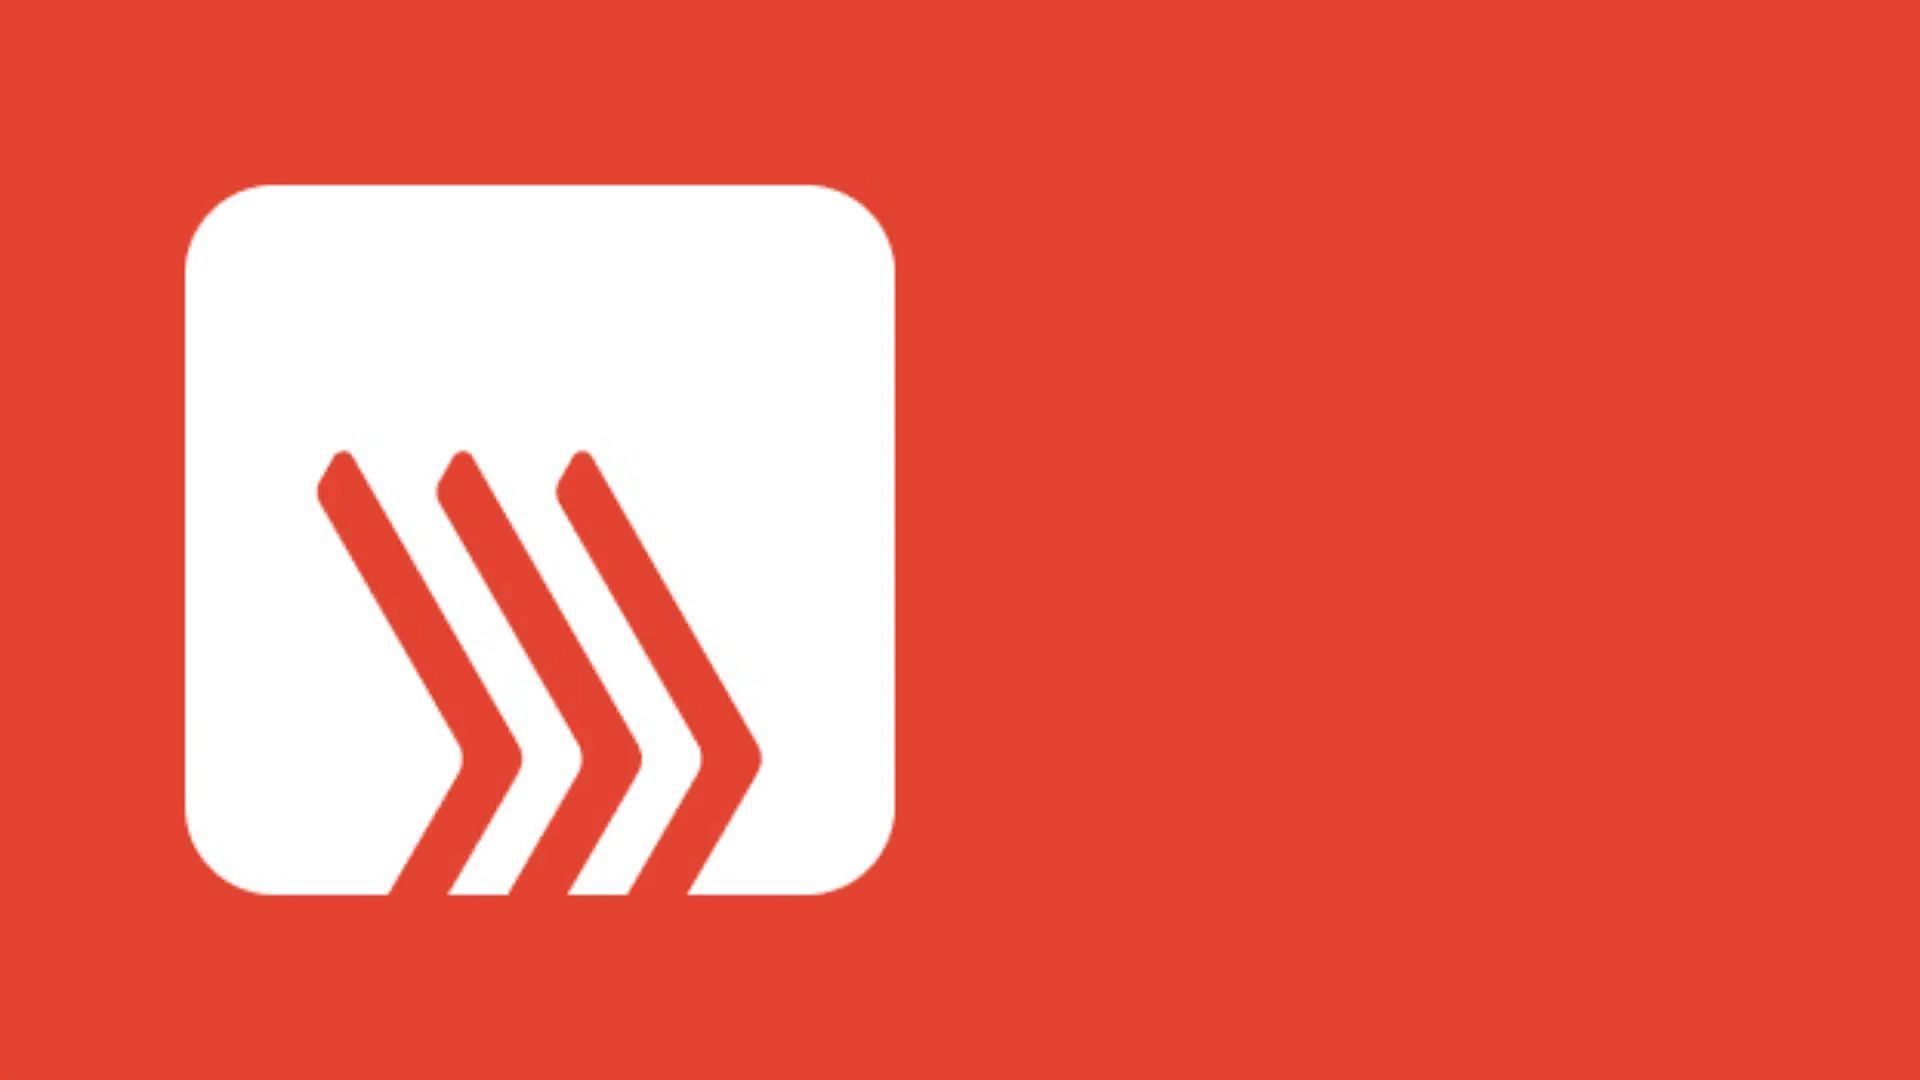 Todoist- one of the best productivity apps for Windows (Image via Chegg)